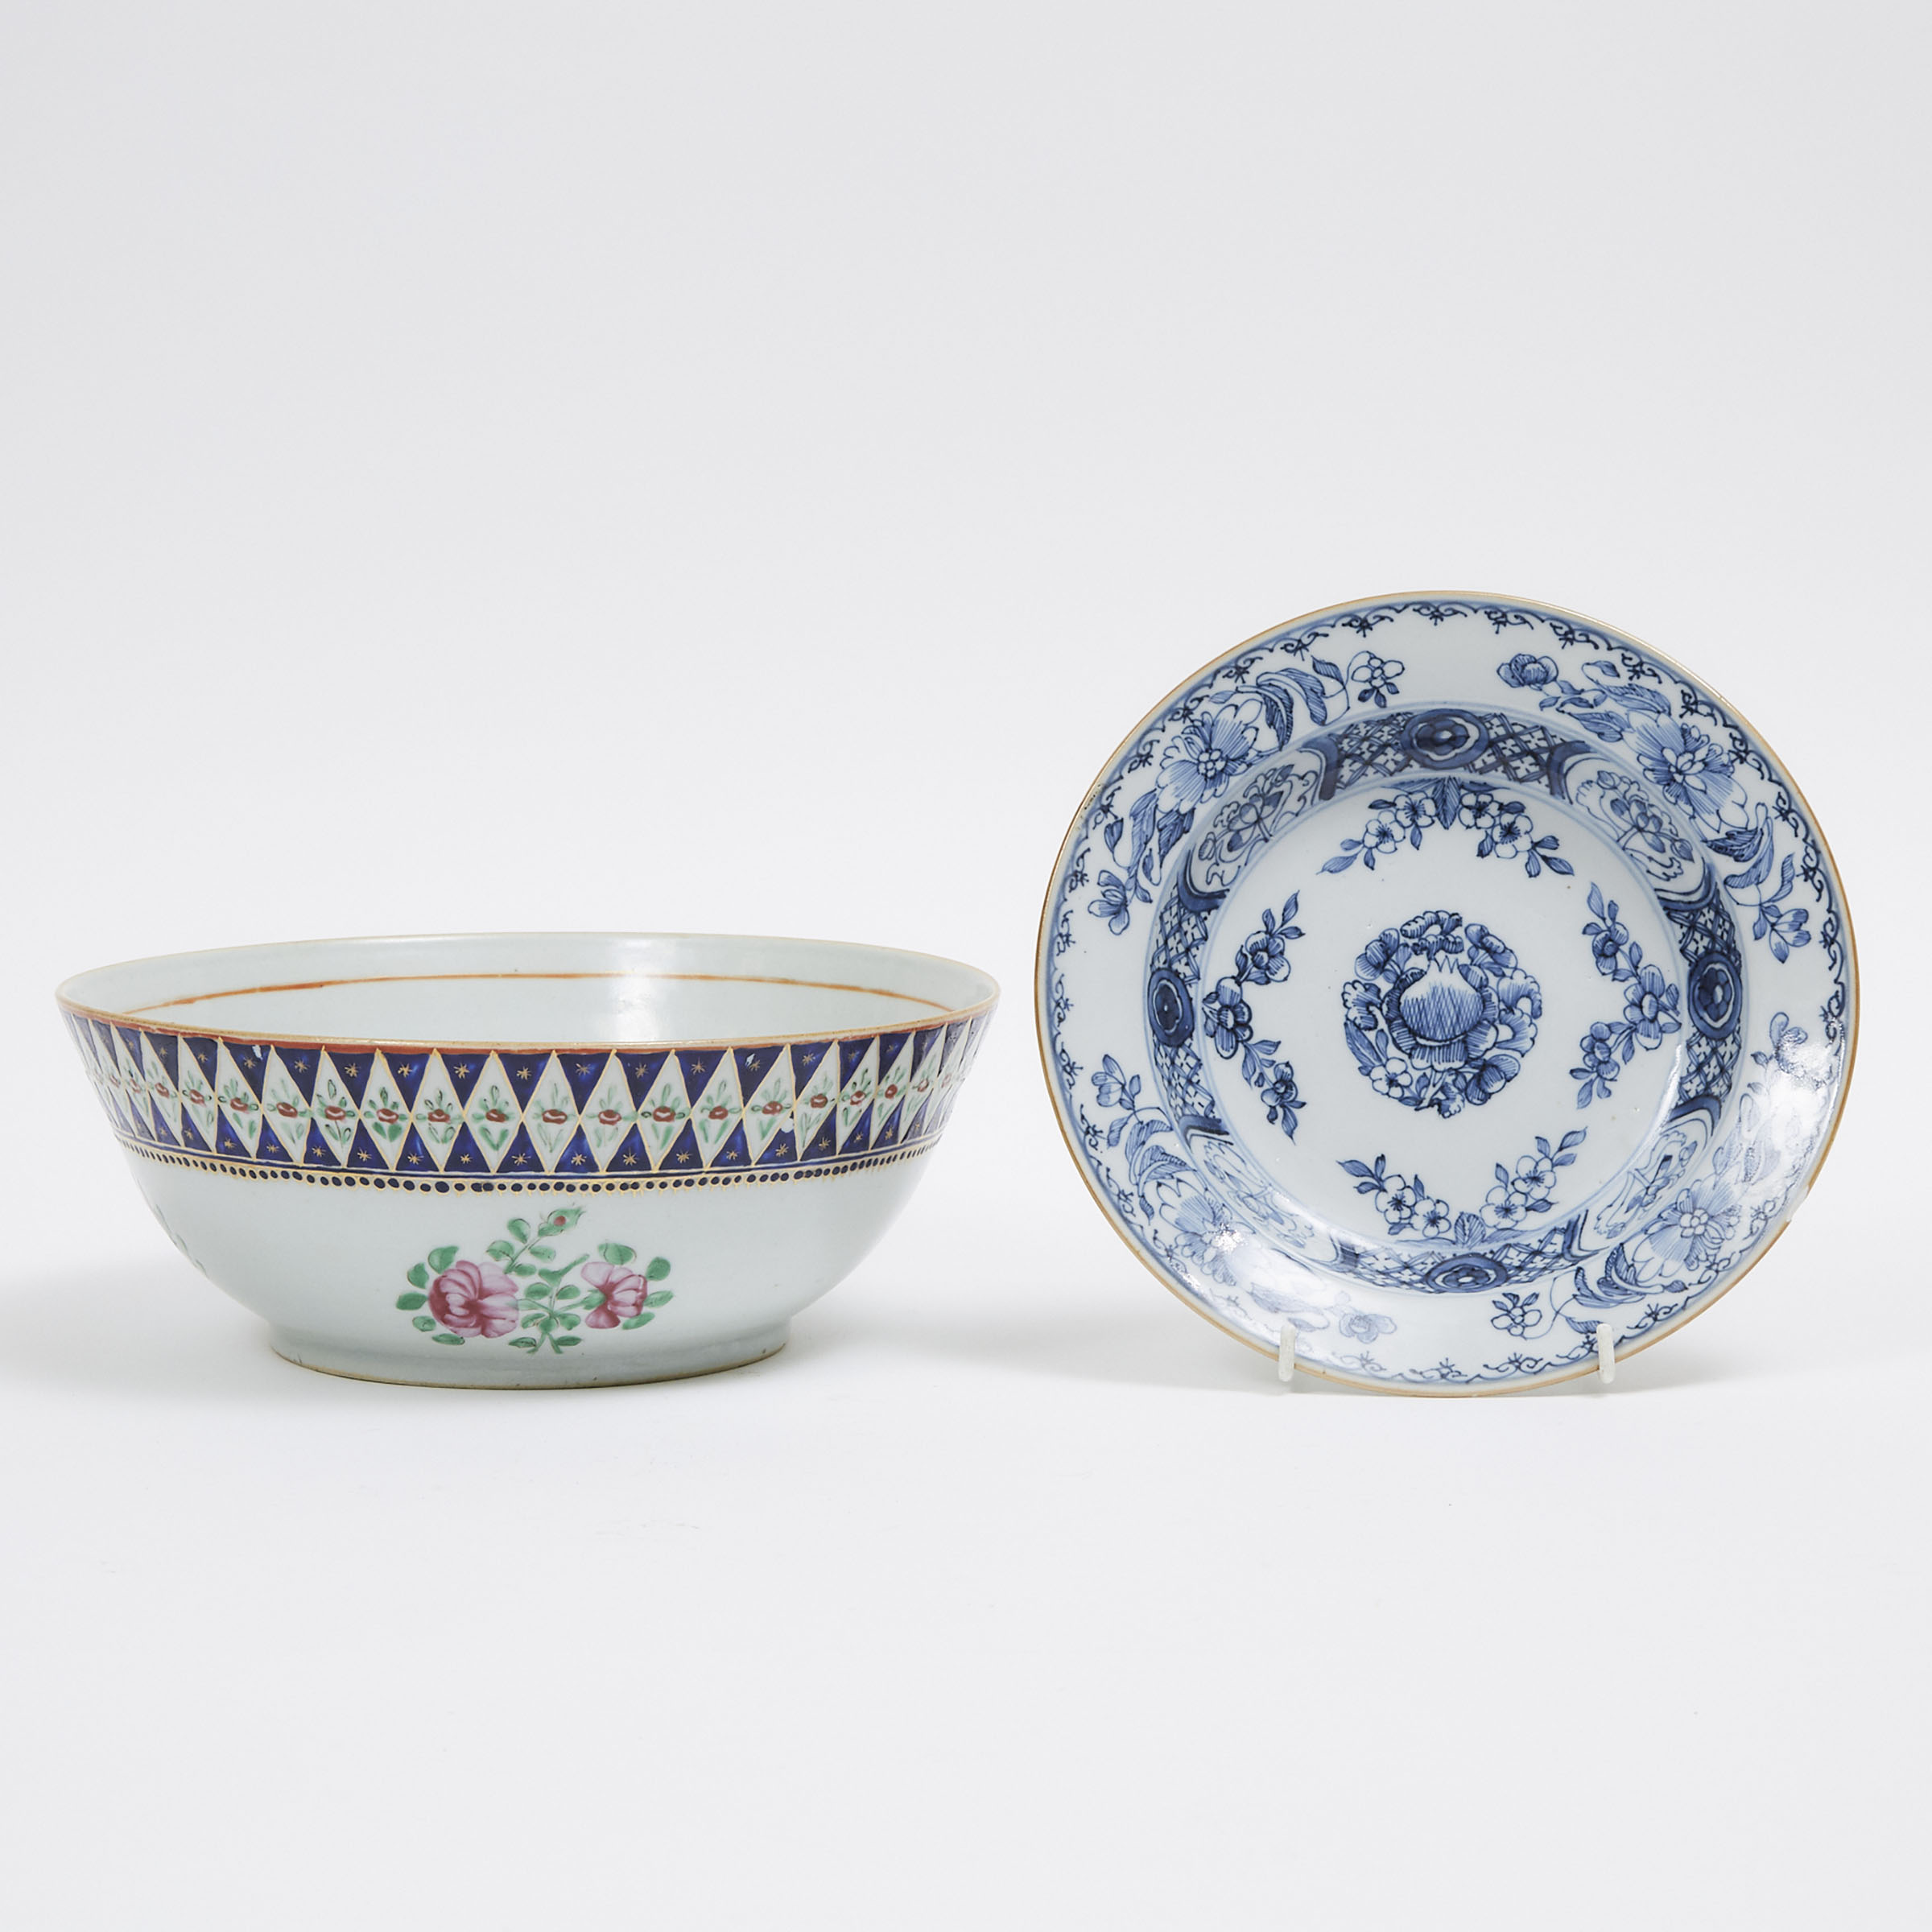 A Chinese Export Punch Bowl with Polychrome Enamel Decoration, together with a Chinese Export Blue and White Dish, 18th Century